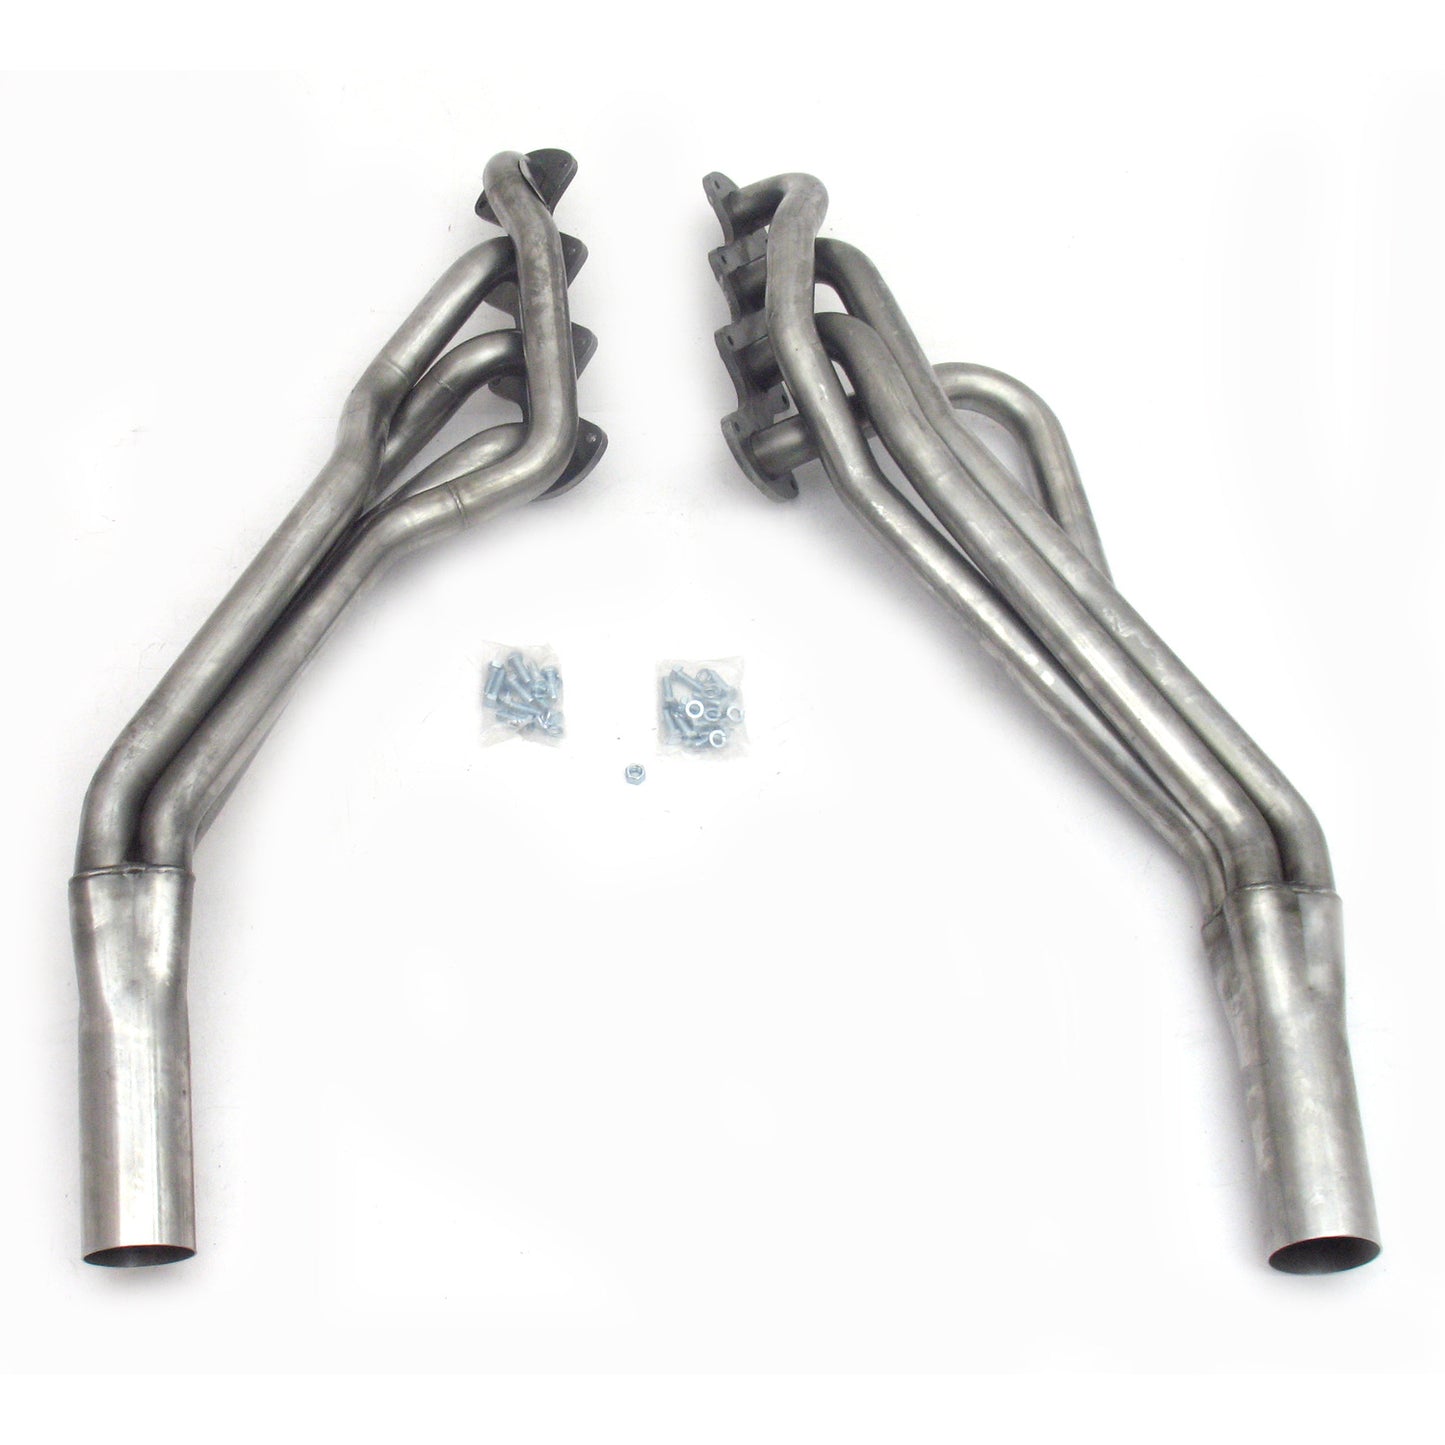 JBA Performance Exhaust 6673S 1 5/8" Header Long Tube Stainless Steel 2005-10 Mustang GT 3" Collector